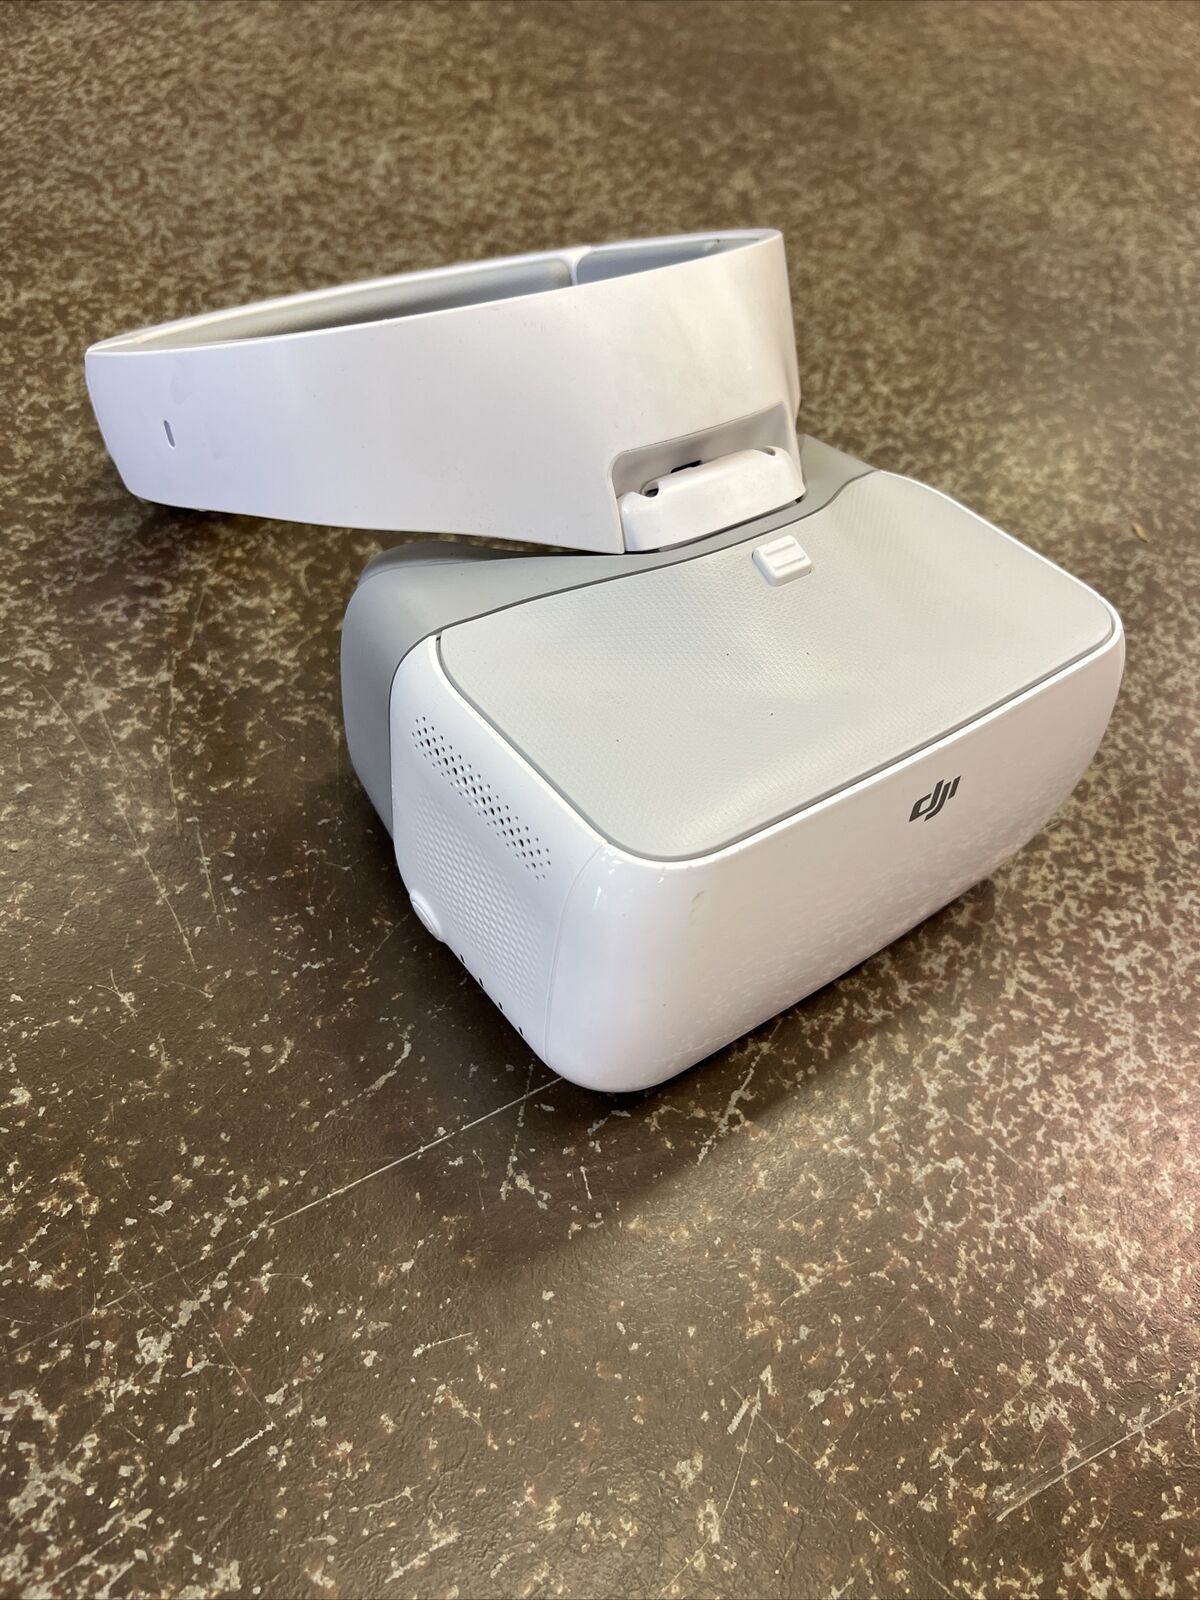 DJI Goggles HD FPV Headset for Drone Flying